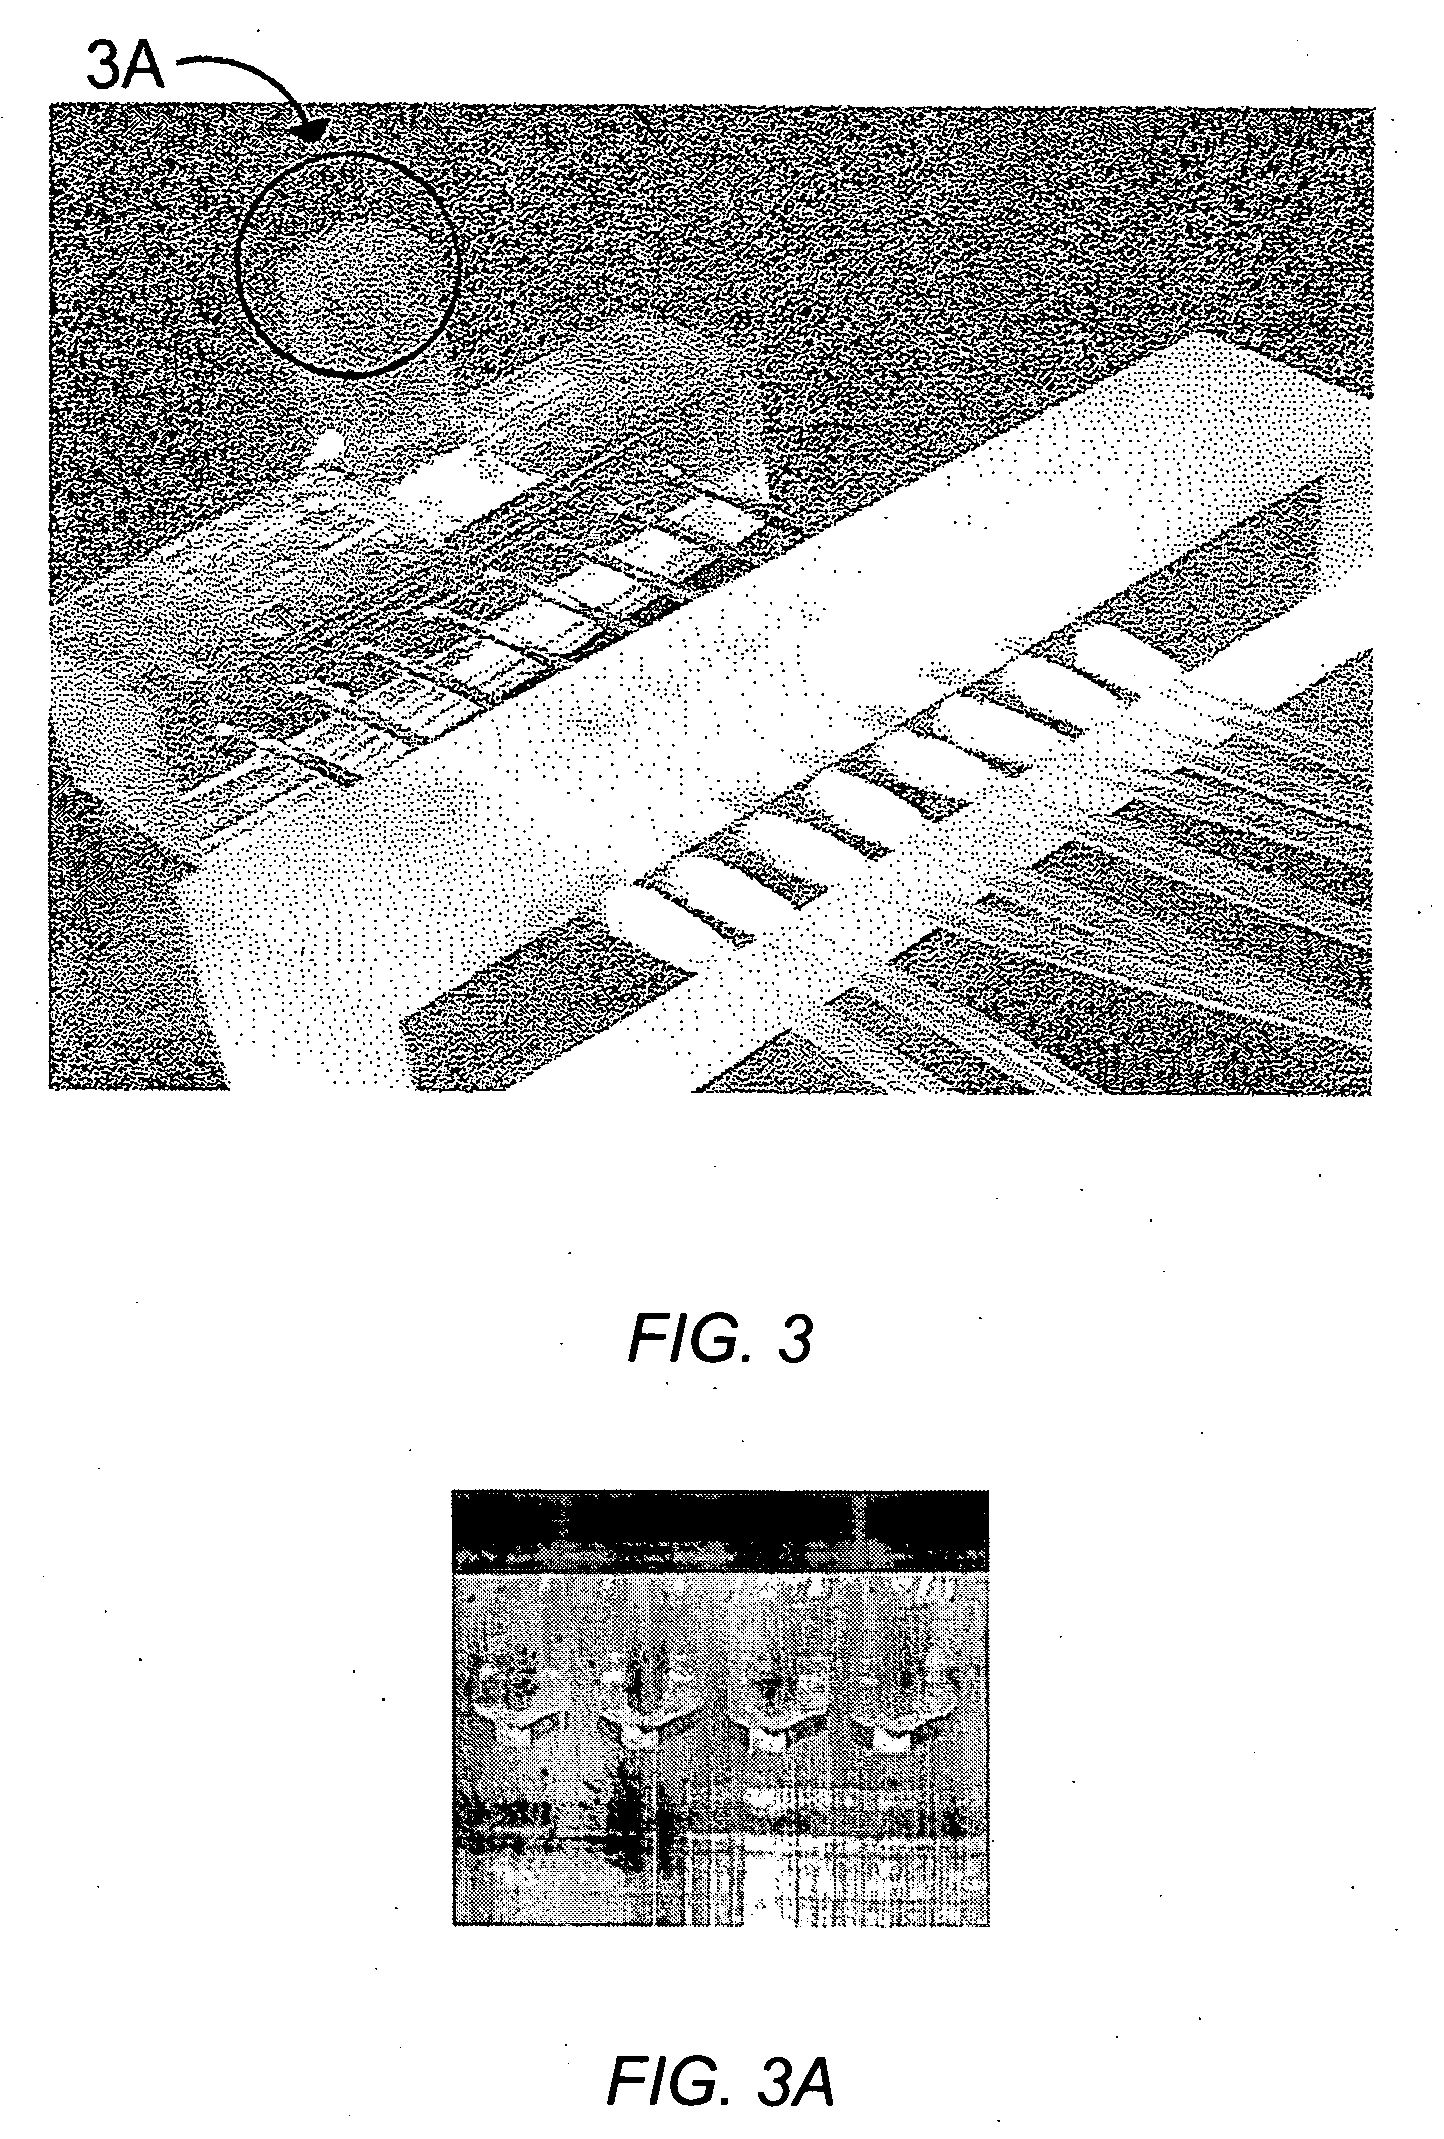 Microfluidic interface for highly parallel addressing of sensing arrays